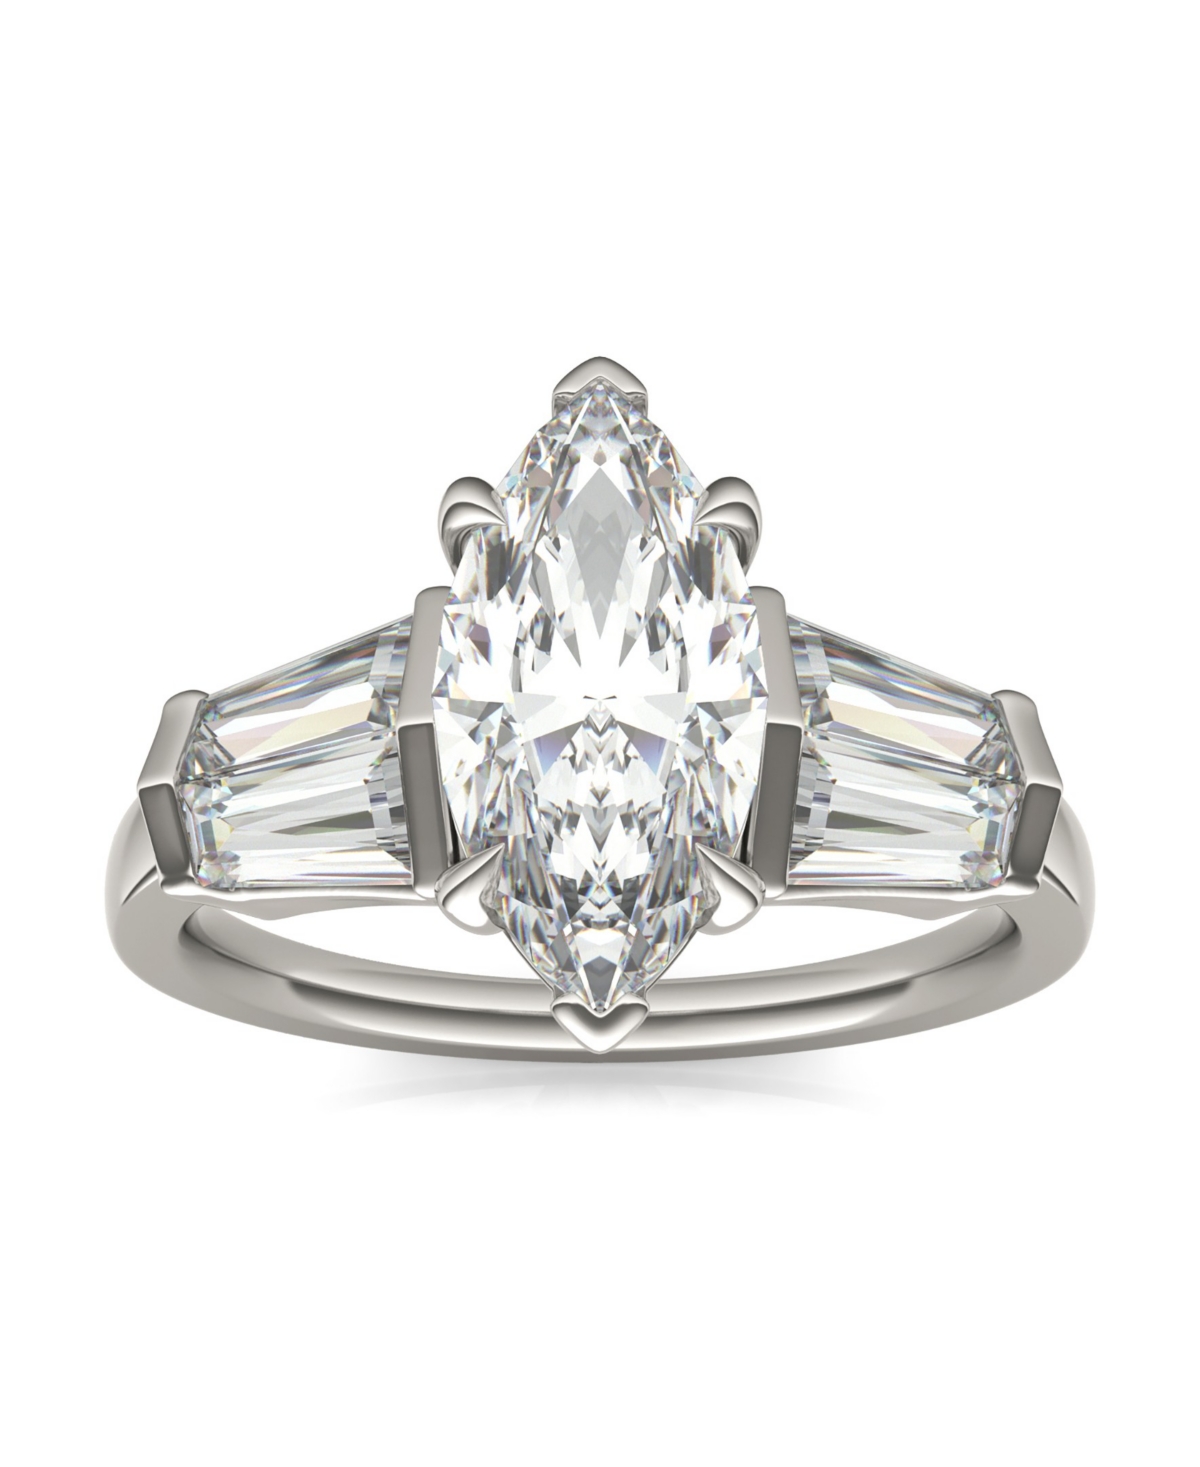 Moissanite Marquise Engagement Ring (3-1/3 Carat Total Weight Diamond Equivalent) in 14K White Gold - White Gold